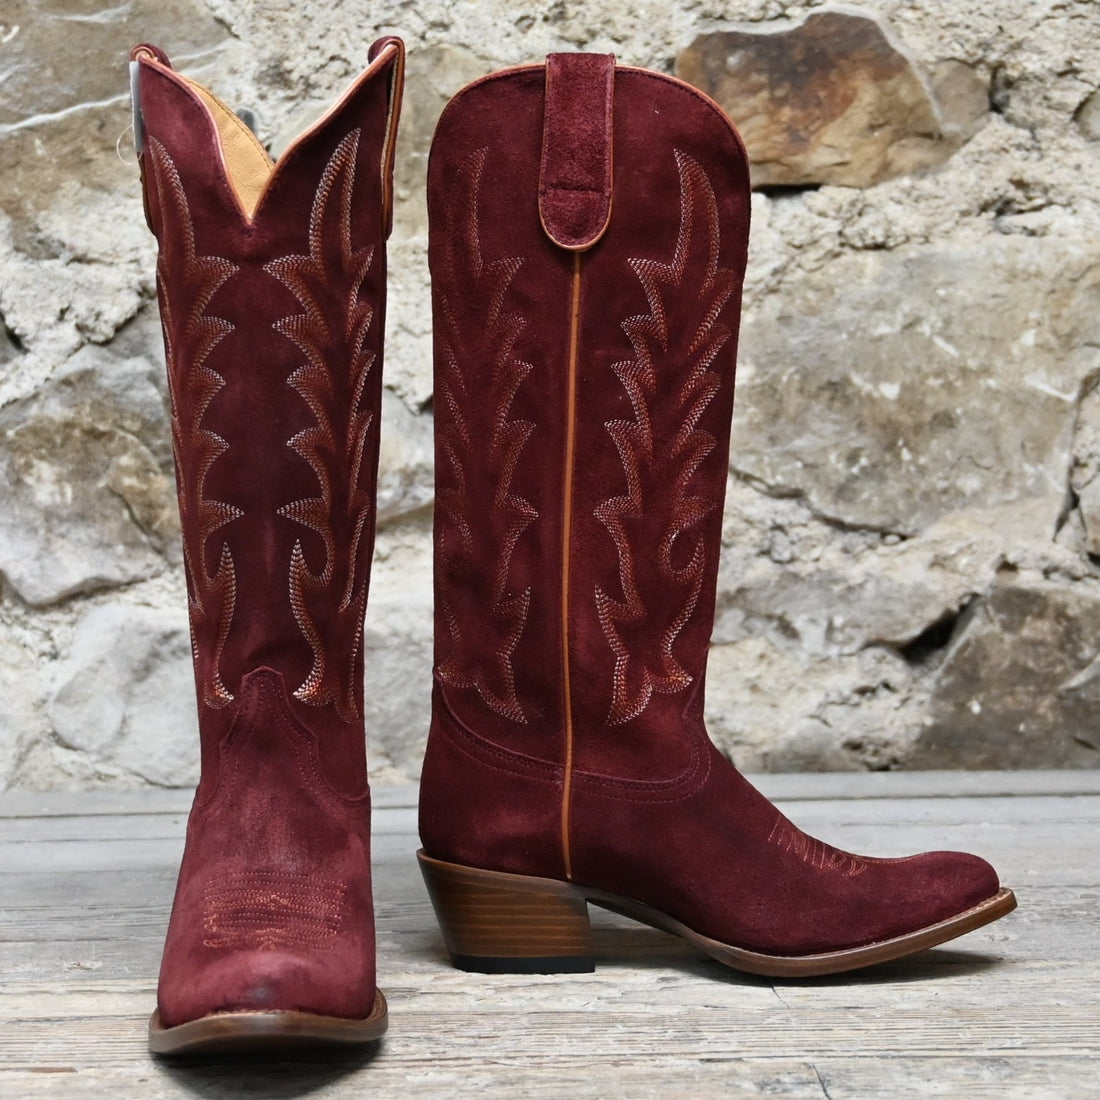 Macie Bean Cabernet Cowgirl Boots in Wine Suede view of front and side